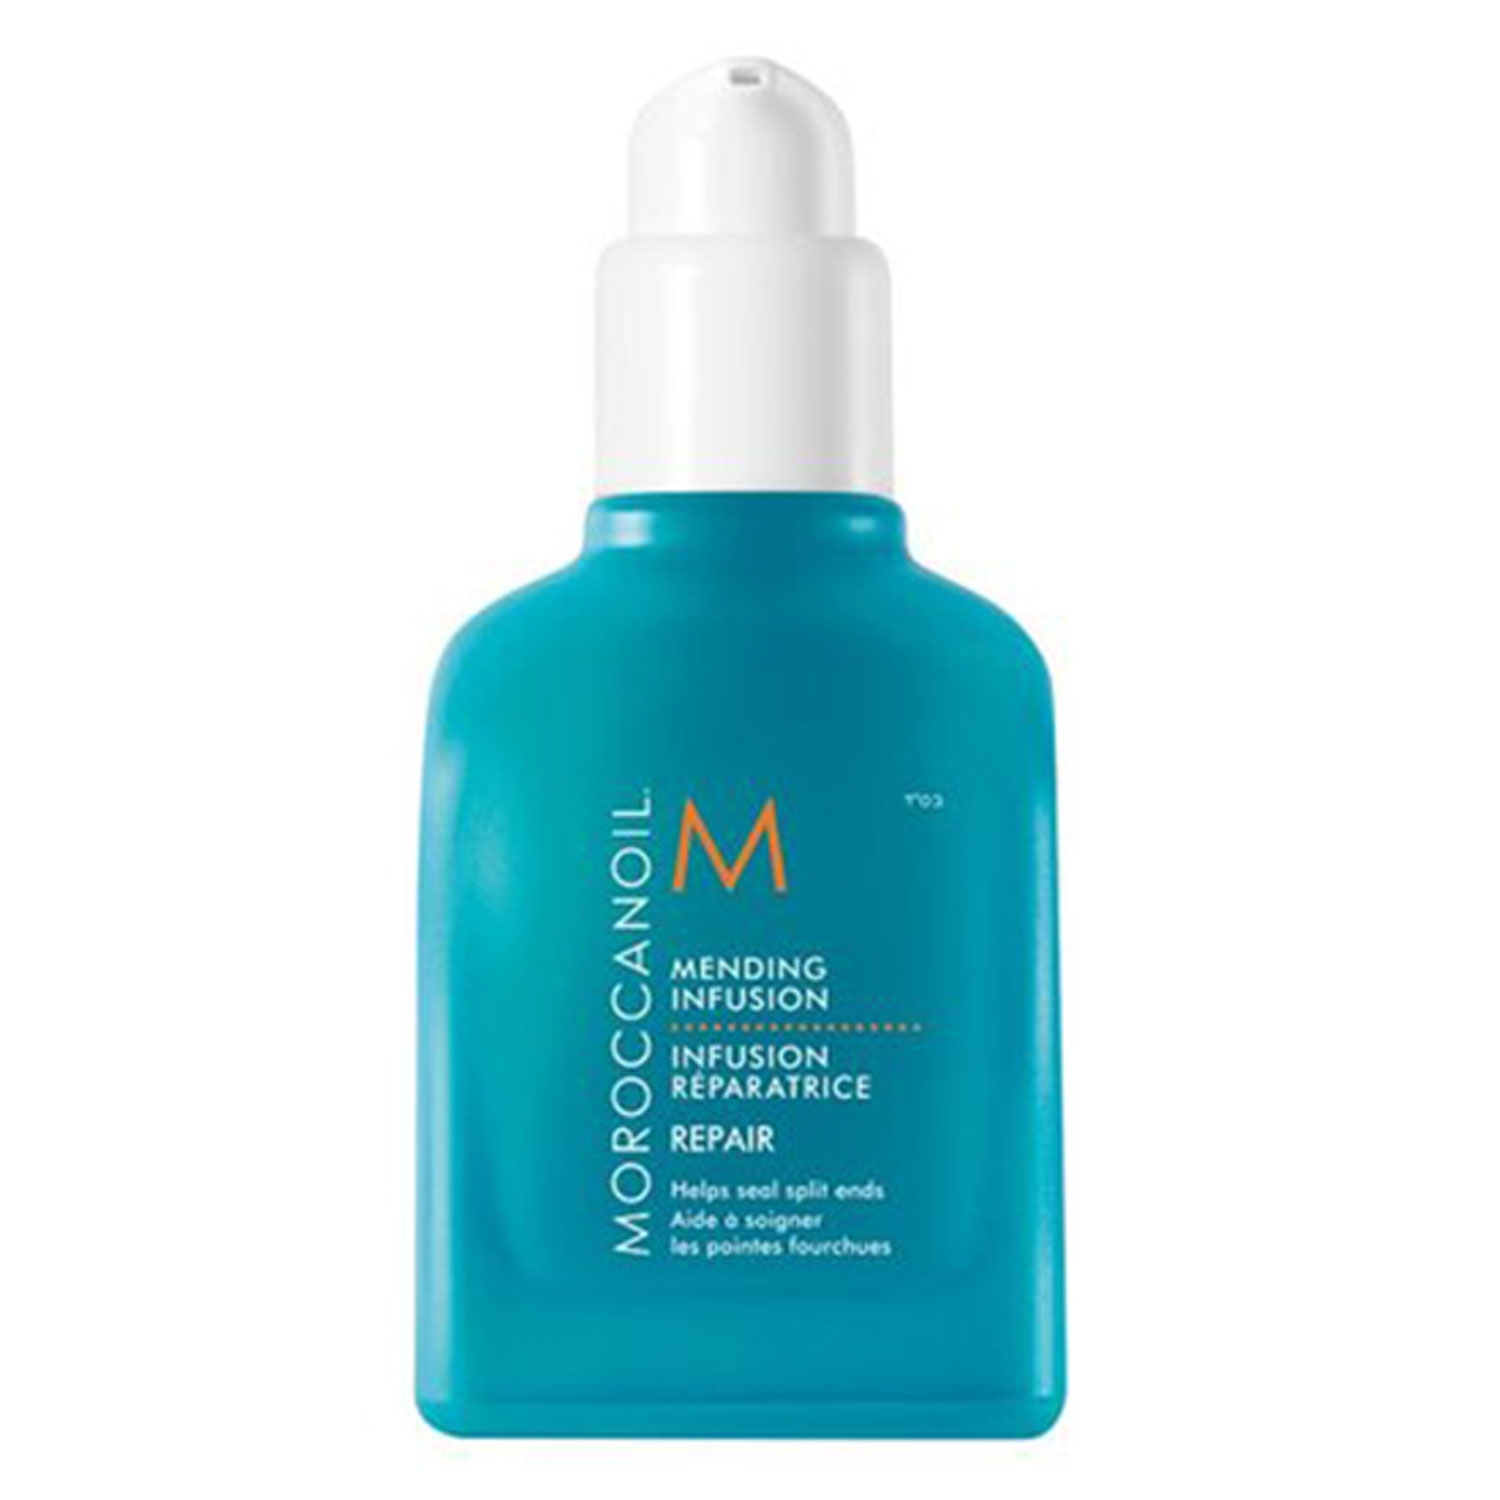 Product image from Moroccanoil - Mending Infusion